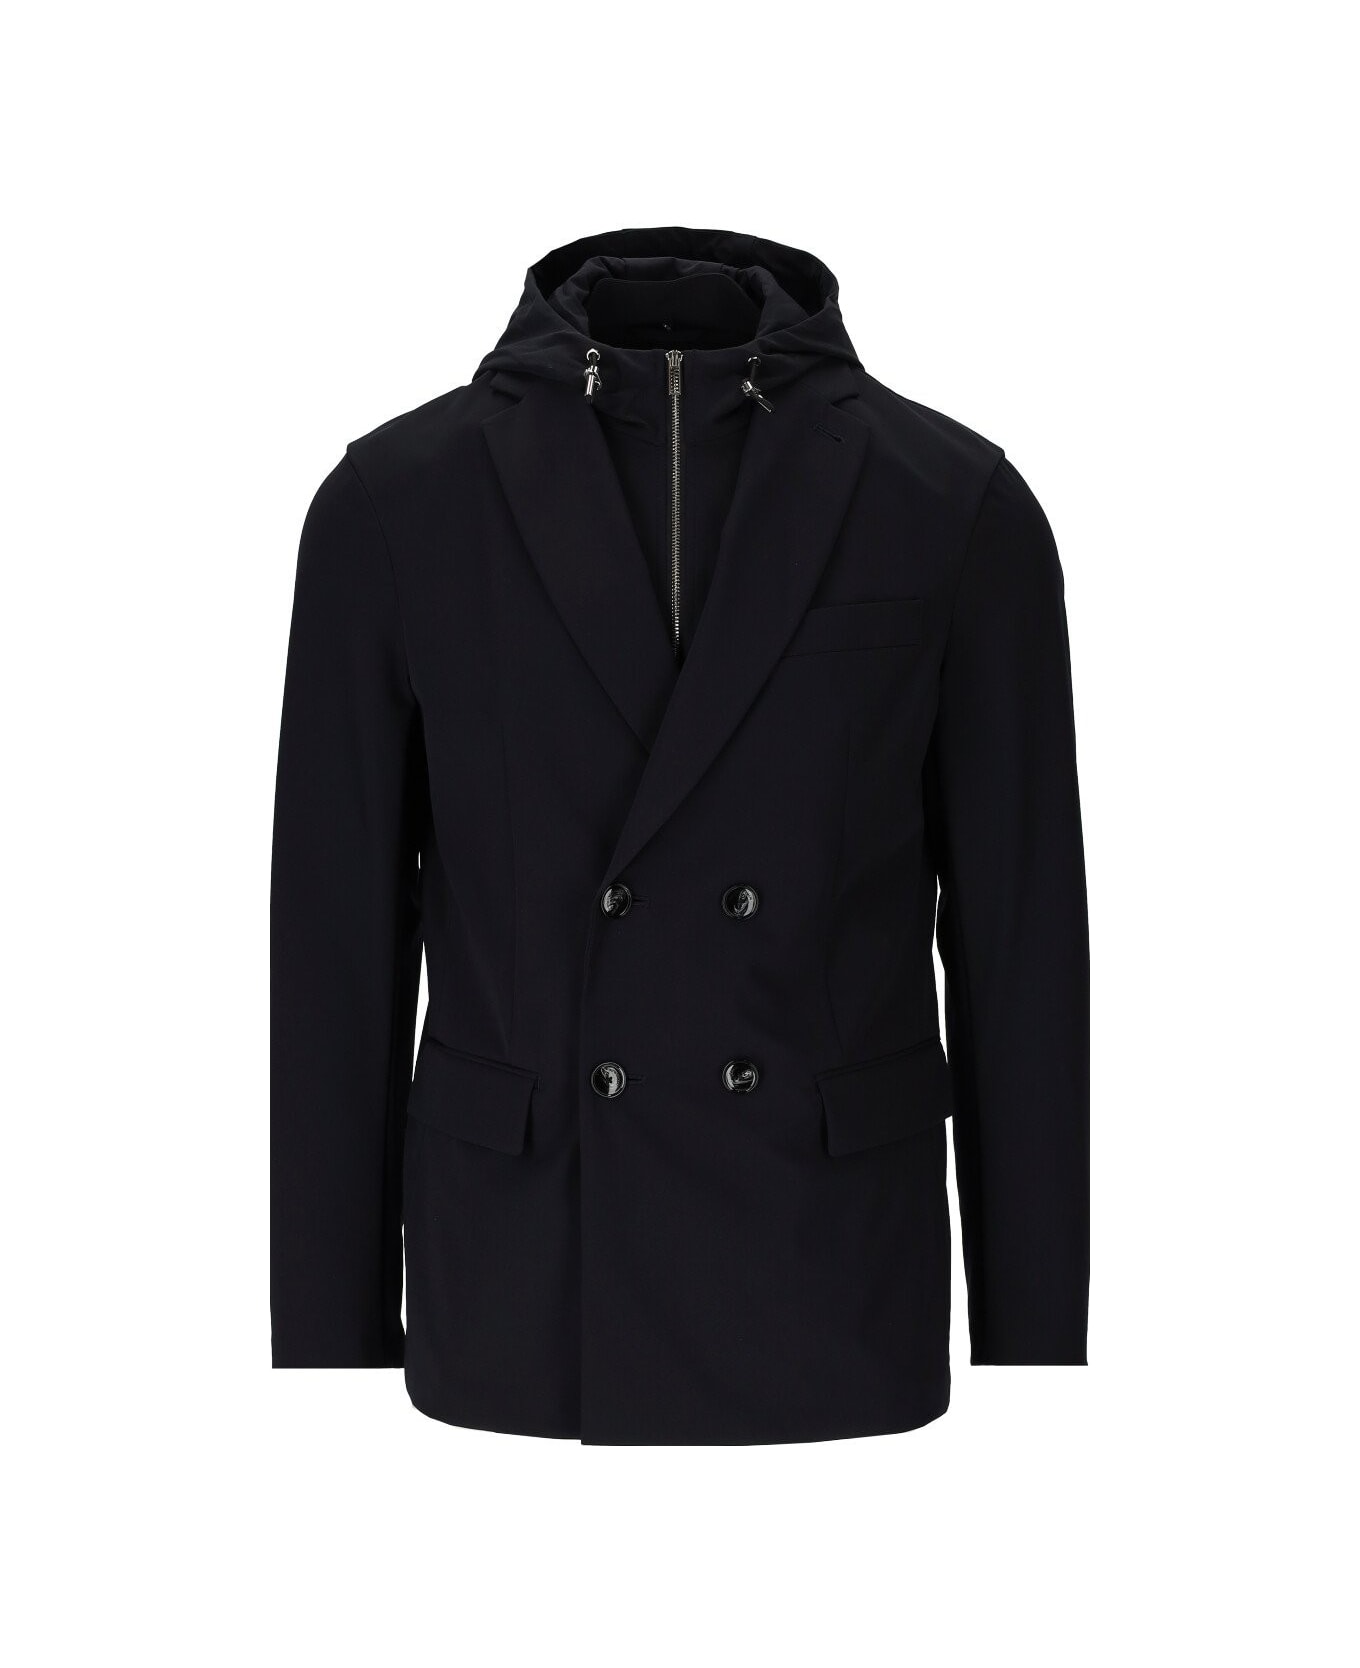 Emporio Armani Blue Double-breasted Hooded Jacket - Blu navy